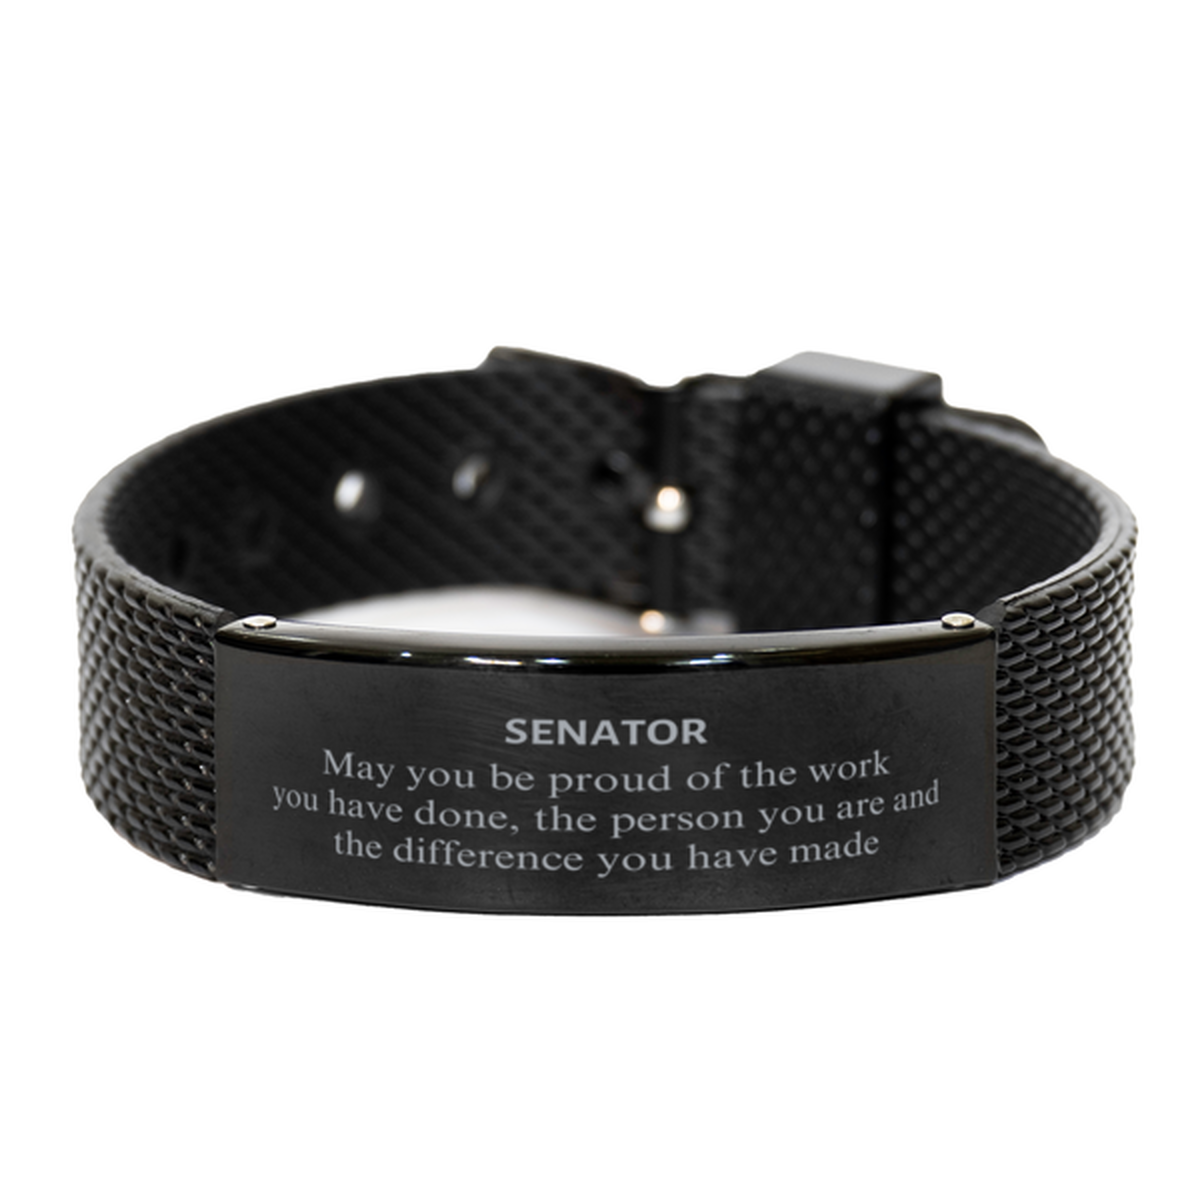 Senator May you be proud of the work you have done, Retirement Senator Black Shark Mesh Bracelet for Colleague Appreciation Gifts Amazing for Senator